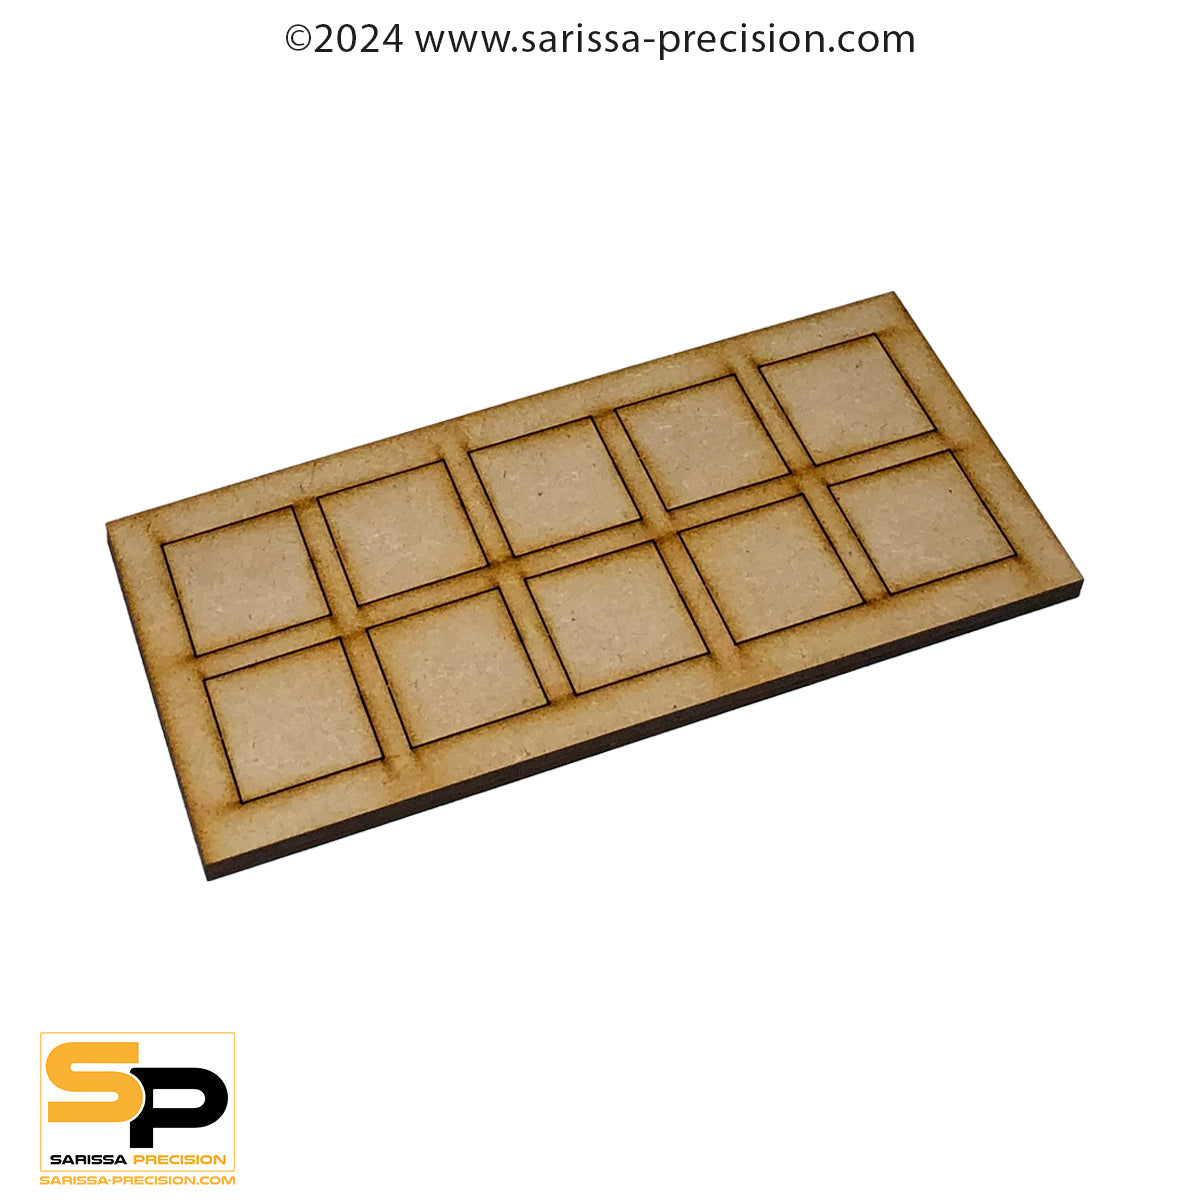 11 x 8 30x30mm Conversion Tray for 25x25mm bases